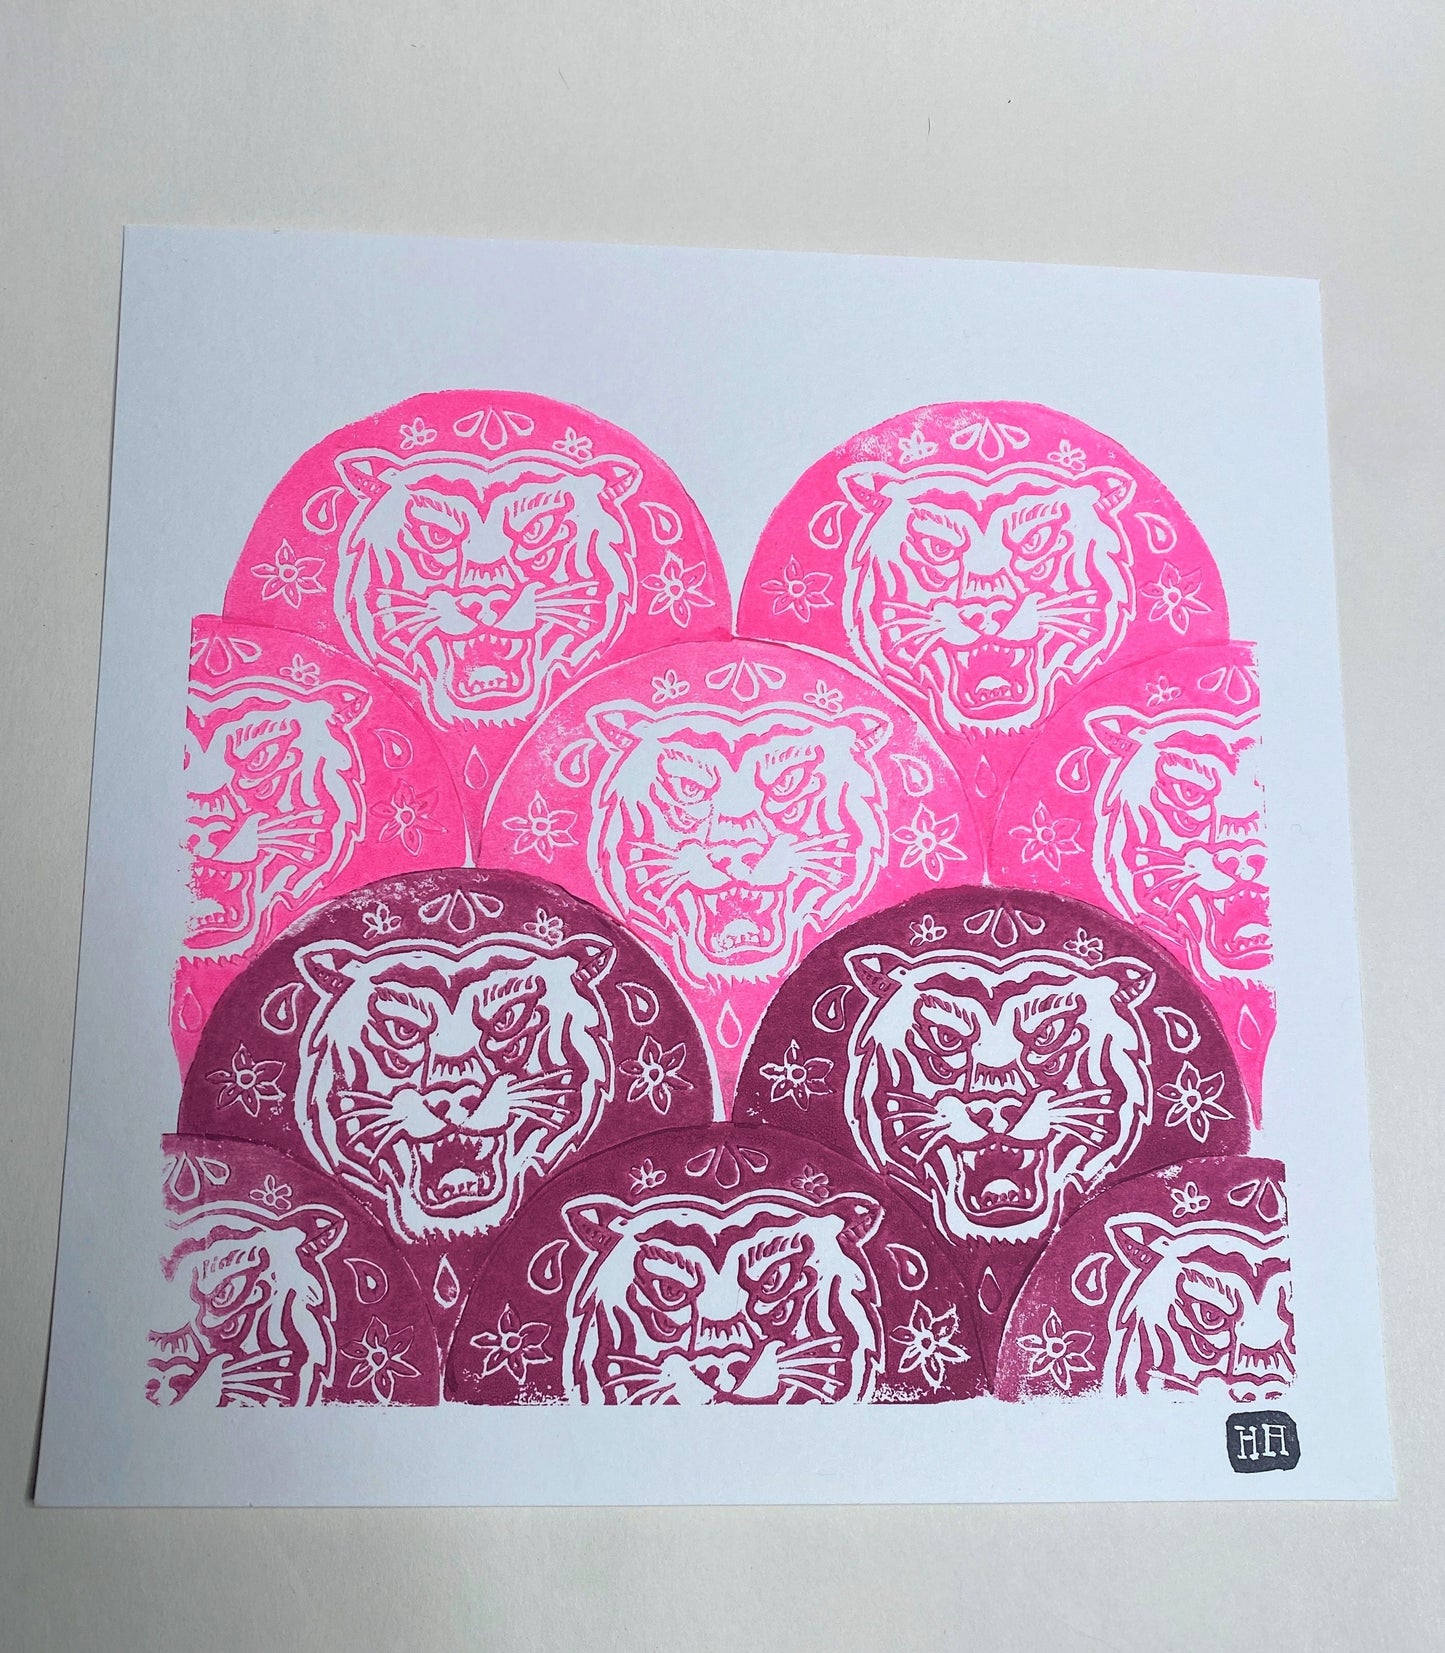 Year of the Tiger - Pink 10"x10"